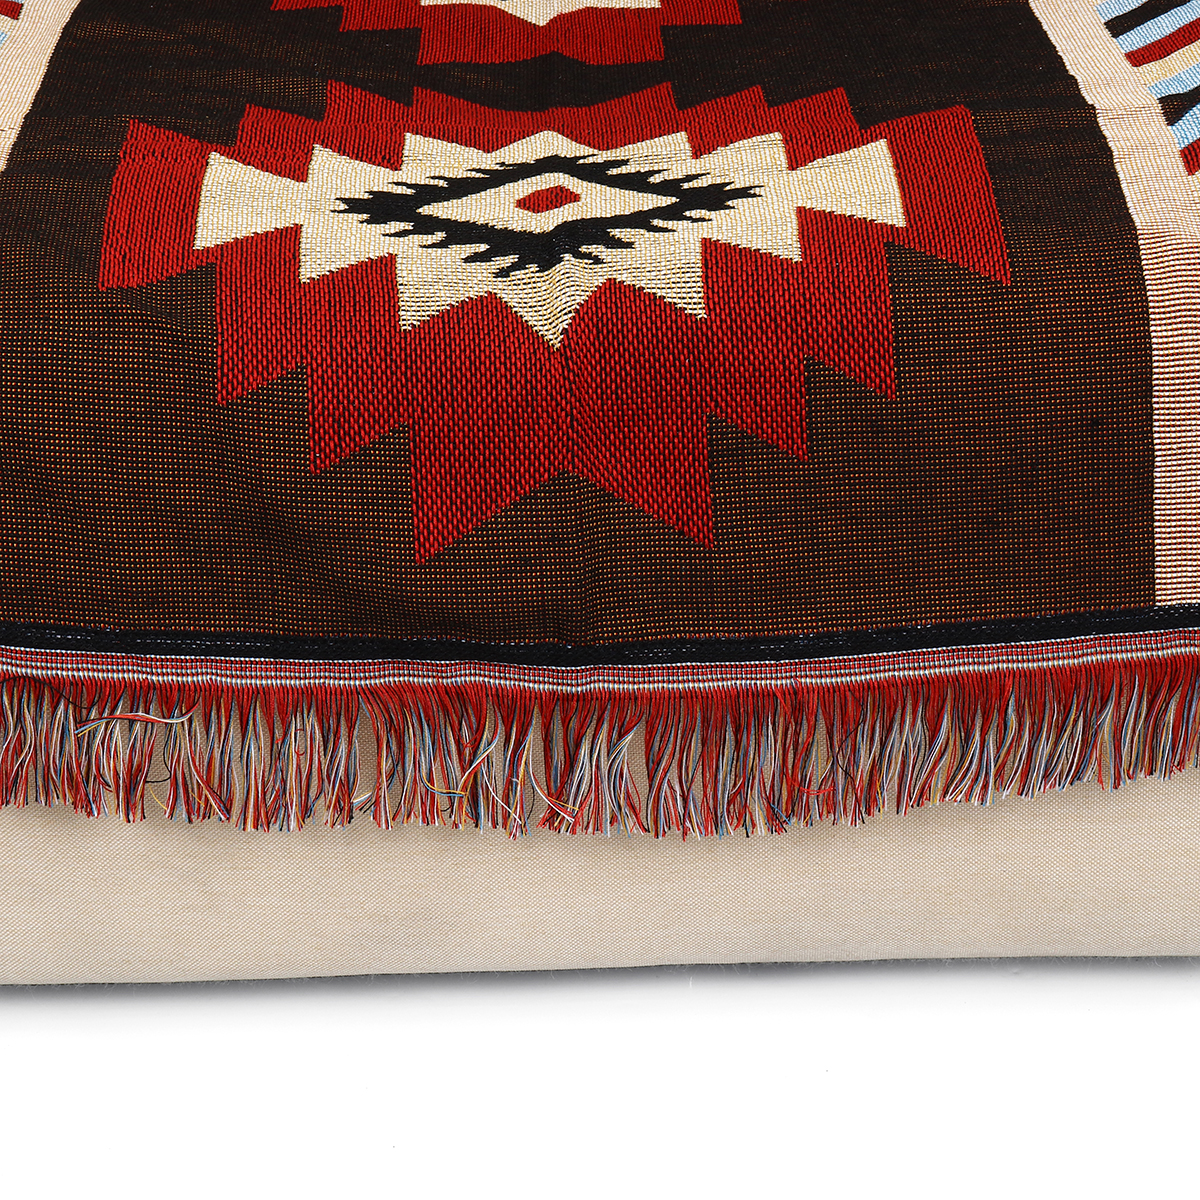 Home Decoration Aztec Navajo Towel Mat Throw Wall Hanging Cotton Rugs Geometry Woven 130*160cm—5